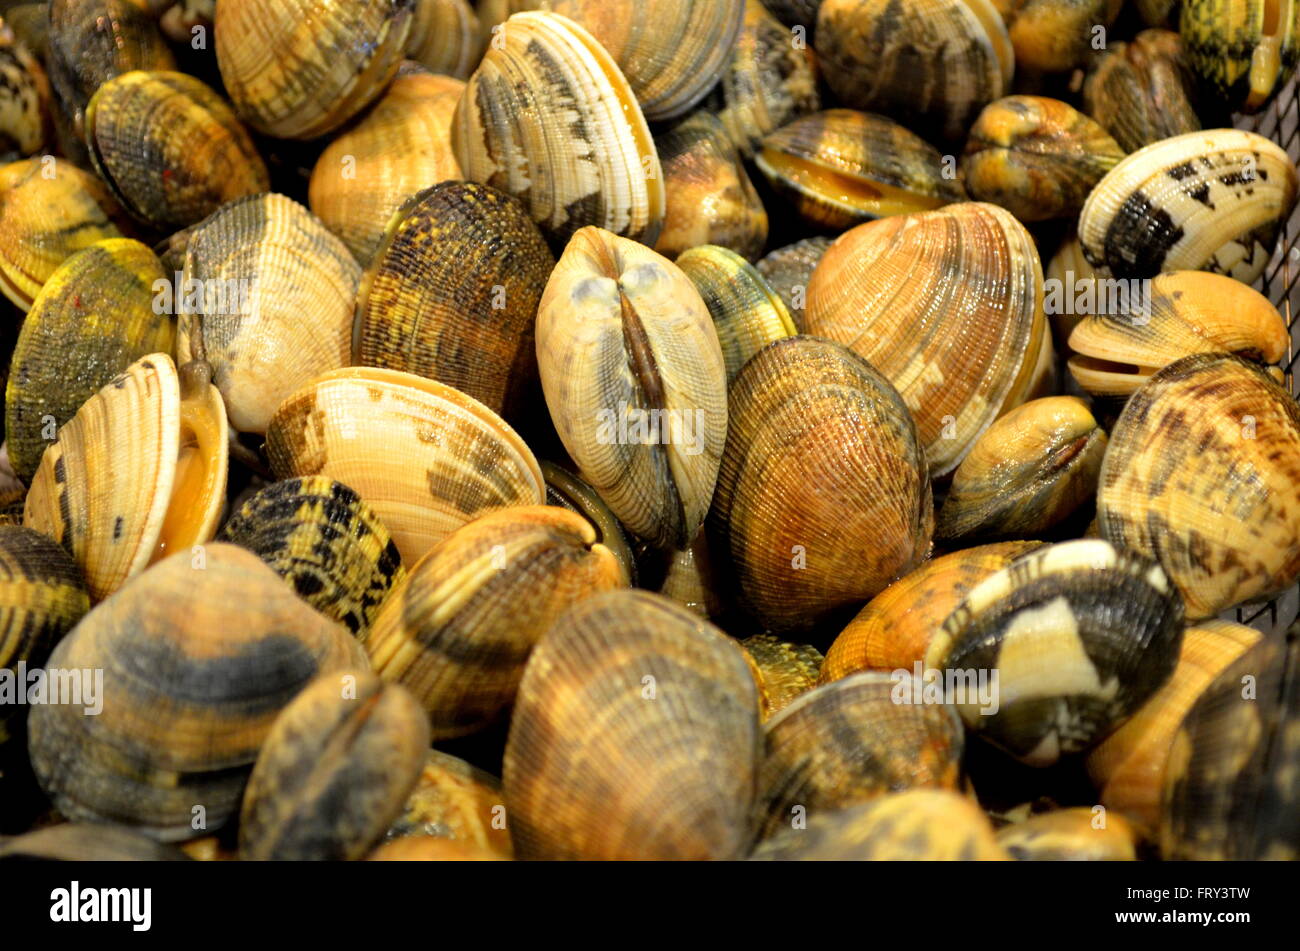 clams in a market Stock Photo